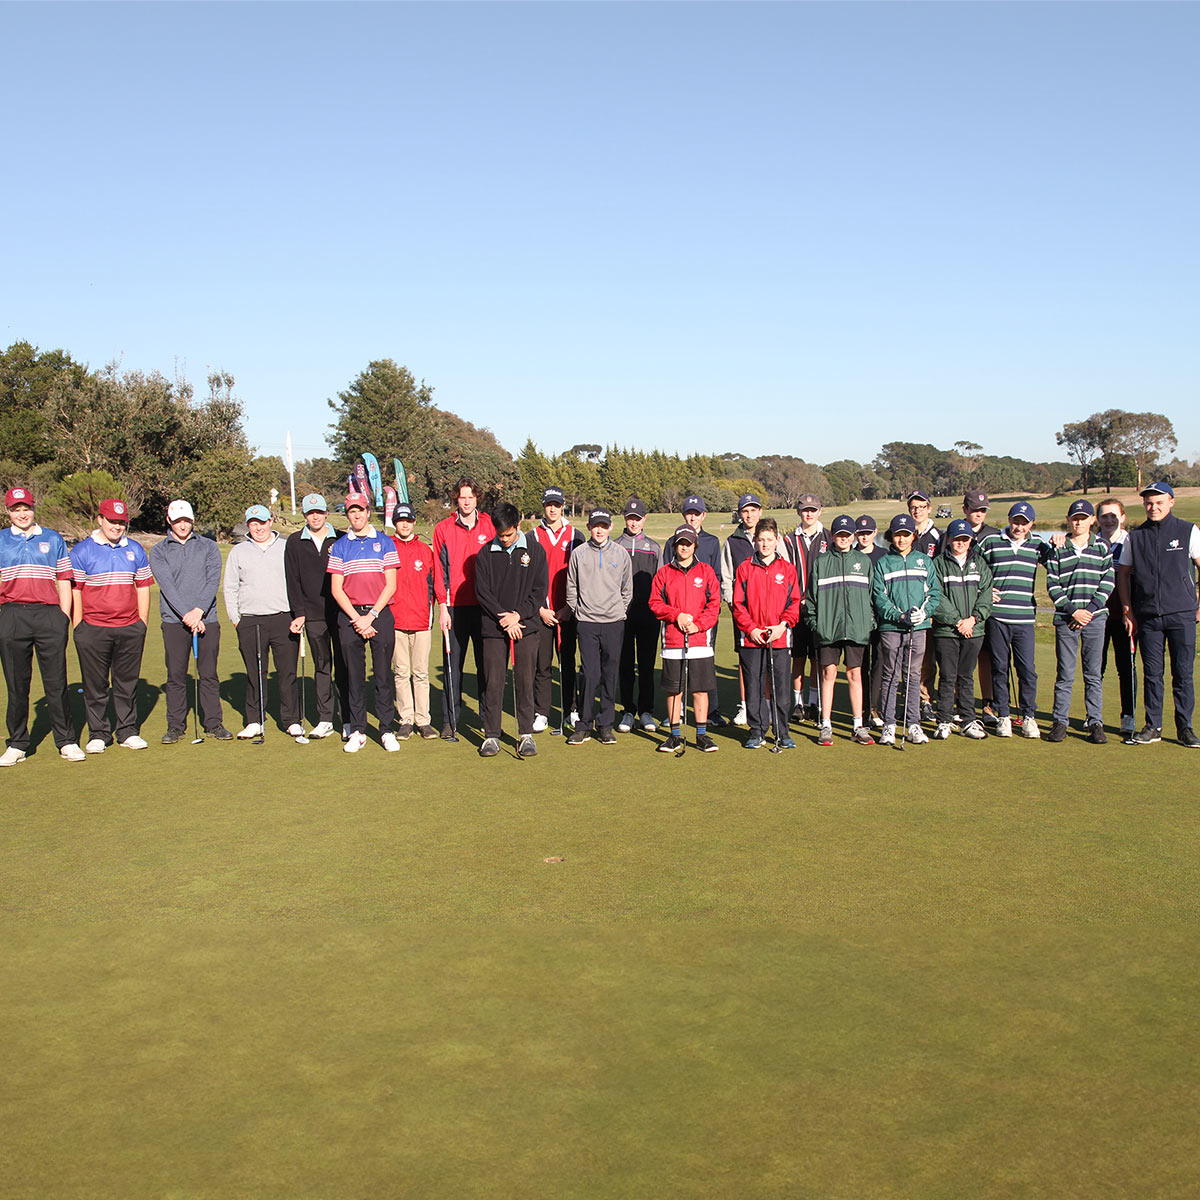 Geelong Independent School Sports Association golf members positioned on a well-manicured golf course, engaged in a social gathering